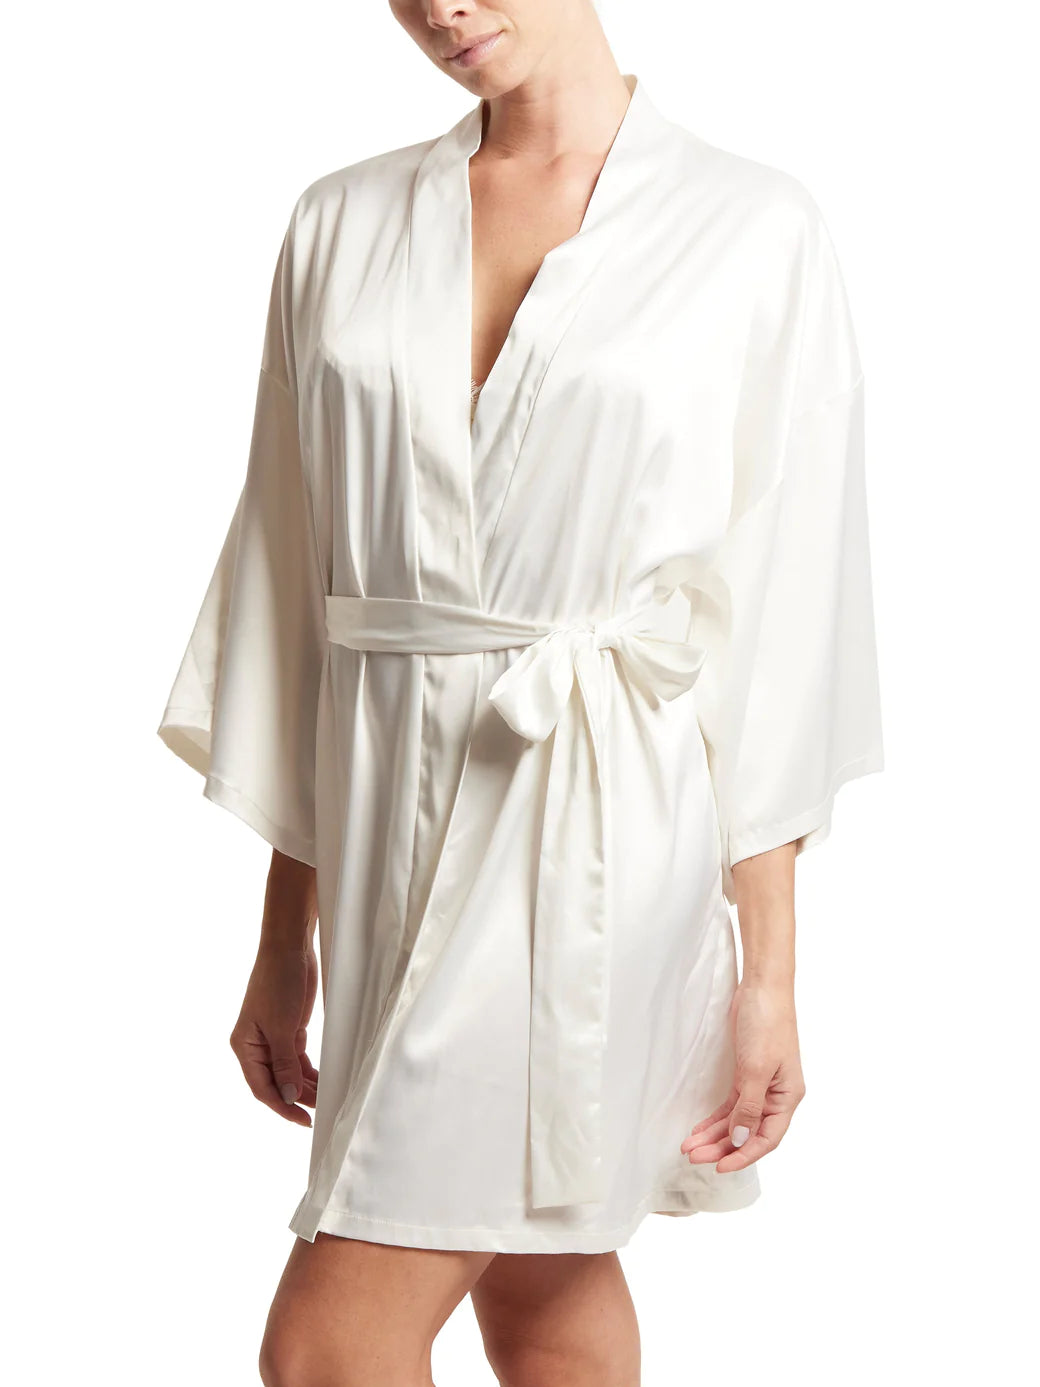 Happily Ever After Robe